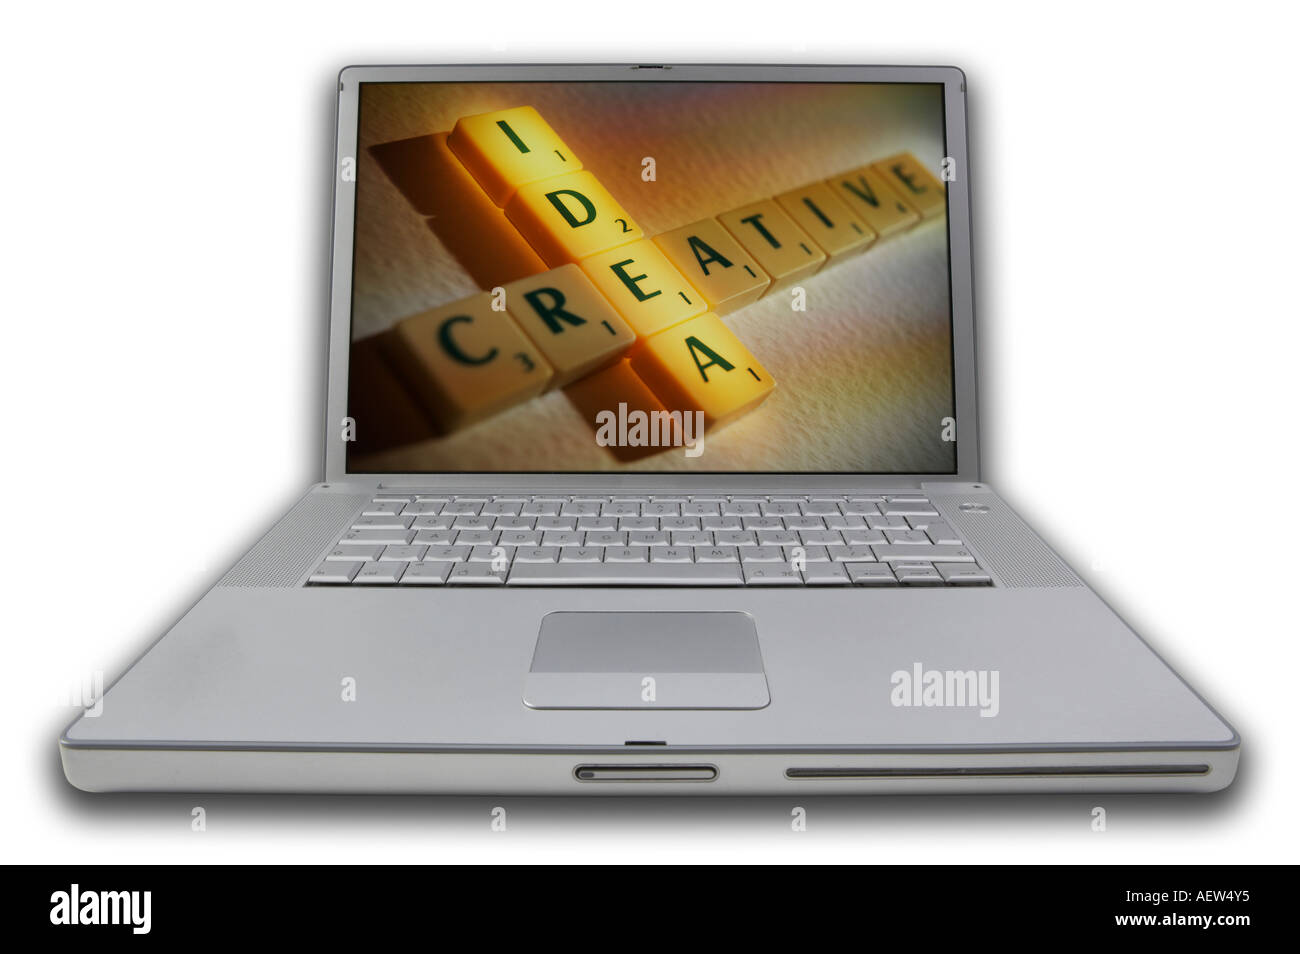 LAP TOP COMPUTER WITH SCRABBLE LETTERS ON SCREEN SPELLING WORDS IDEA CREATIVE THINK Stock Photo